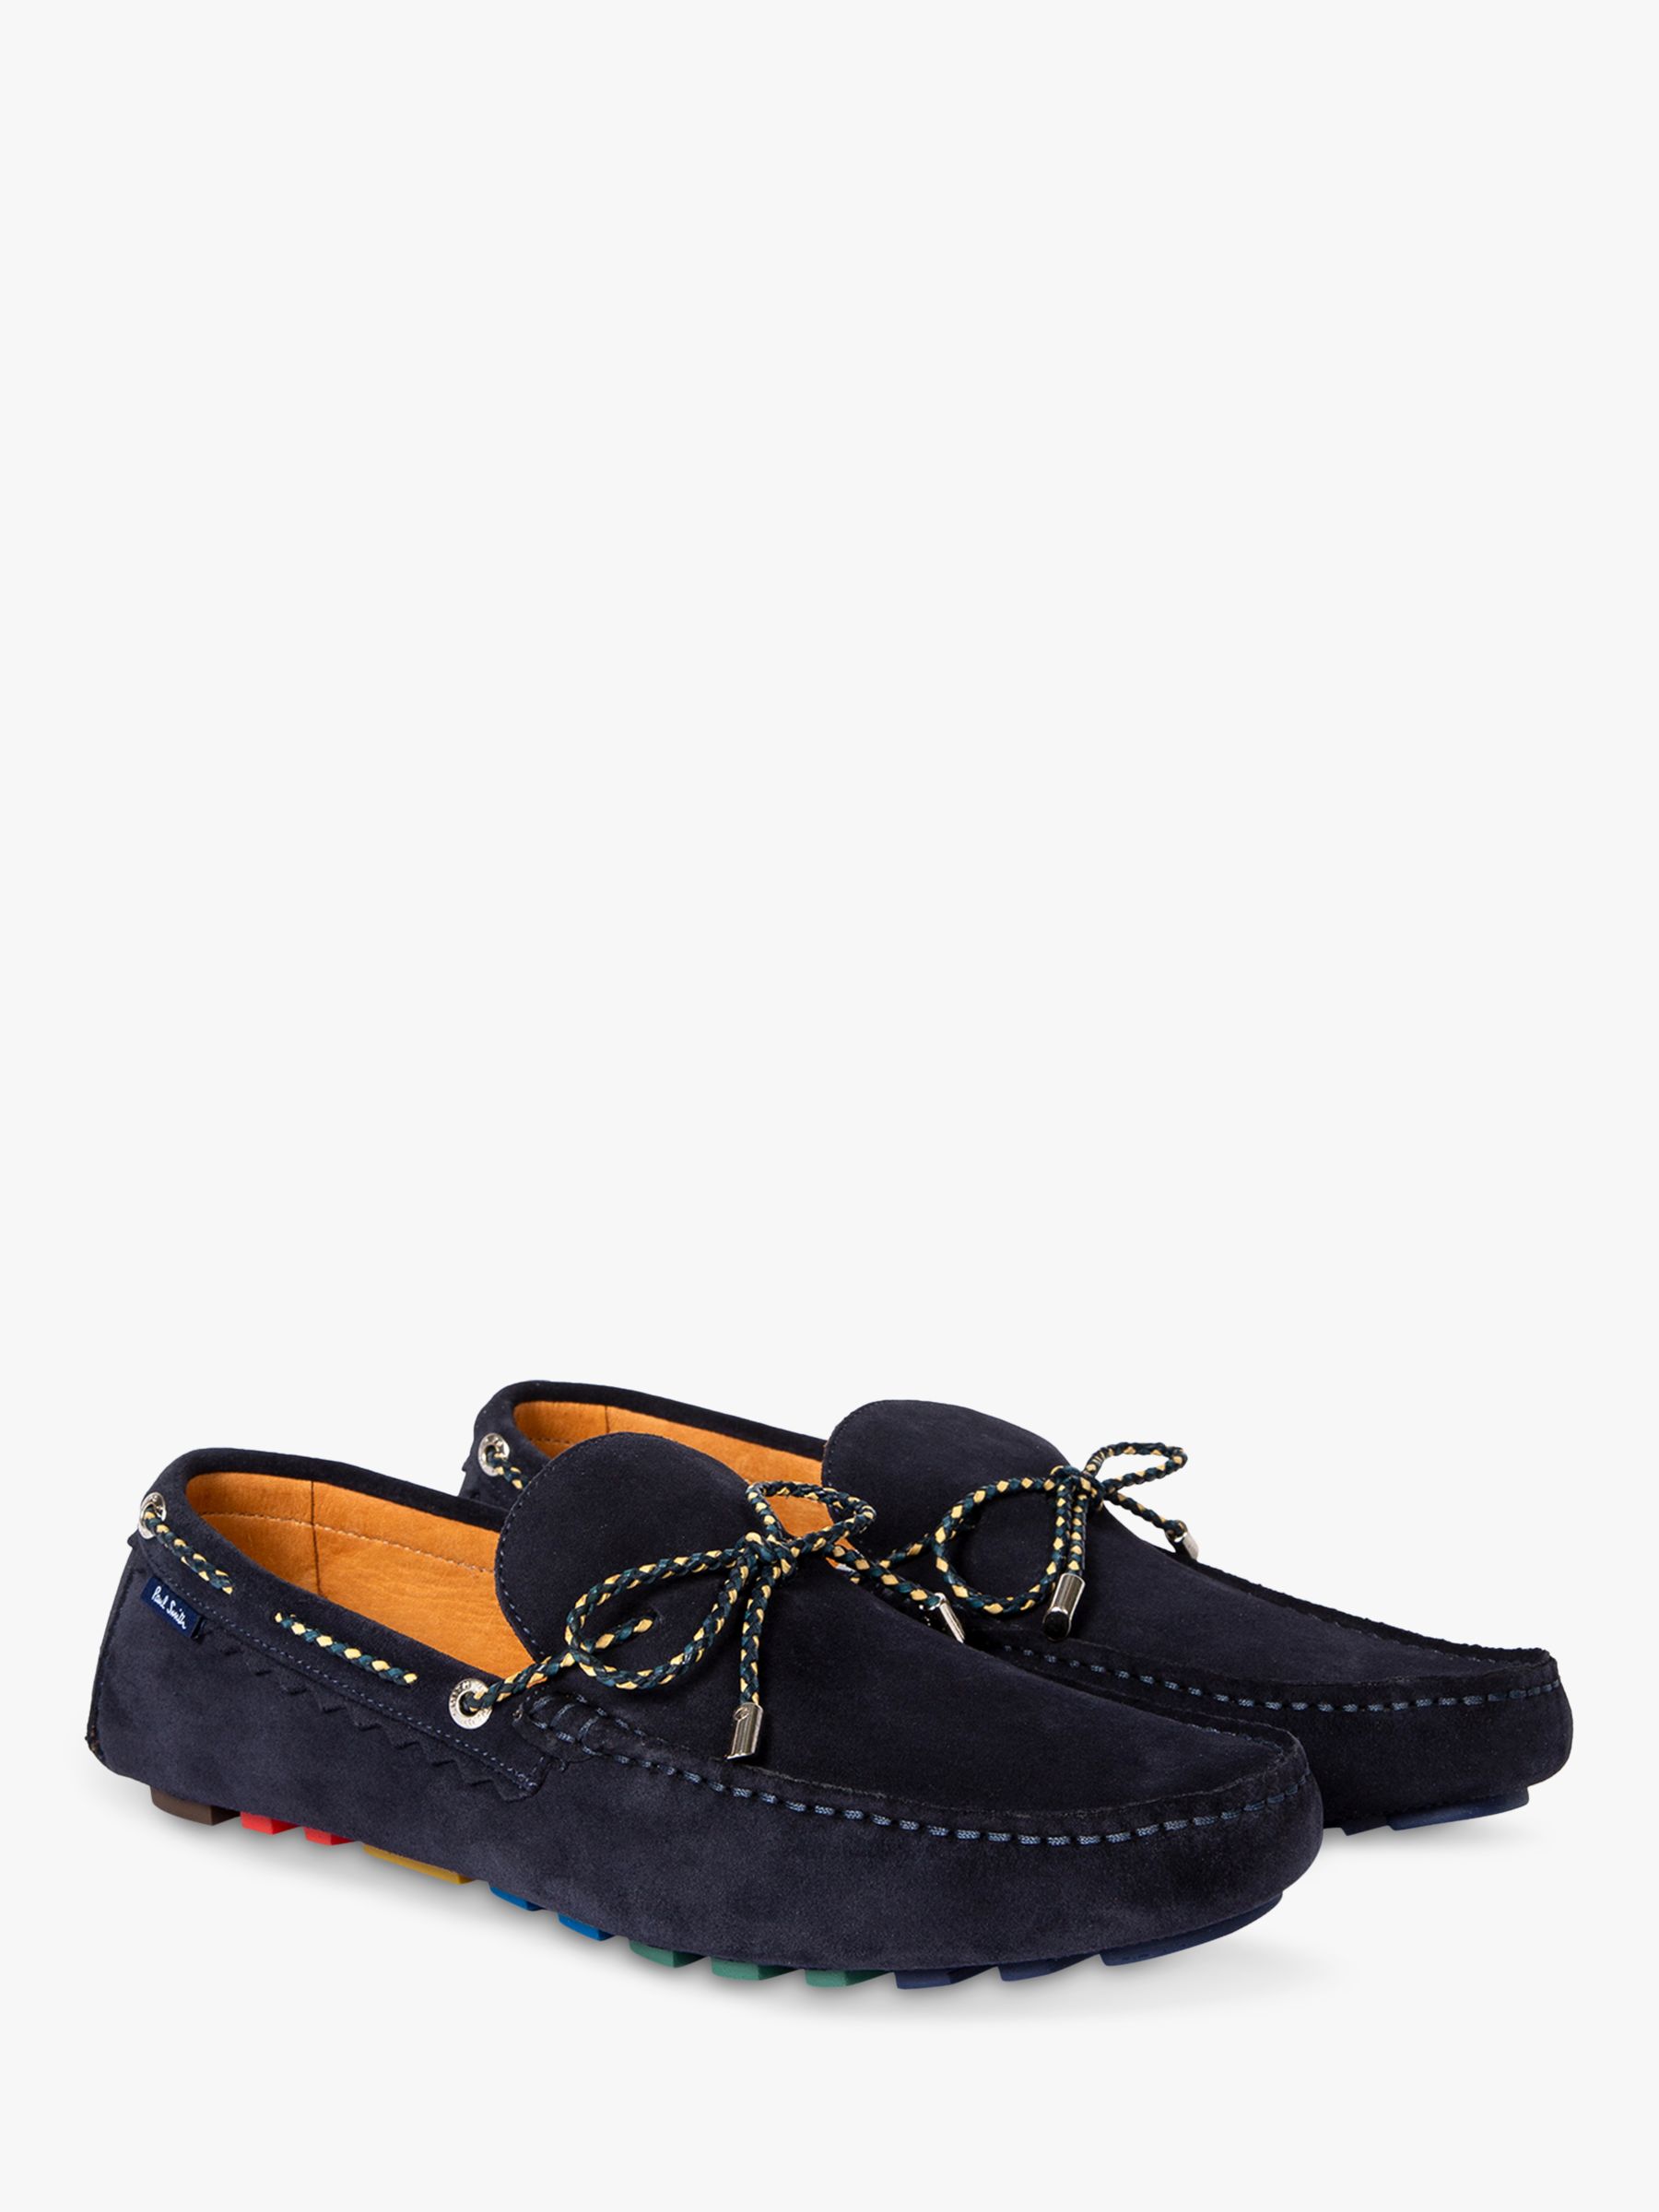 Paul Smith Springfield Suede Loafers, Navy, 8